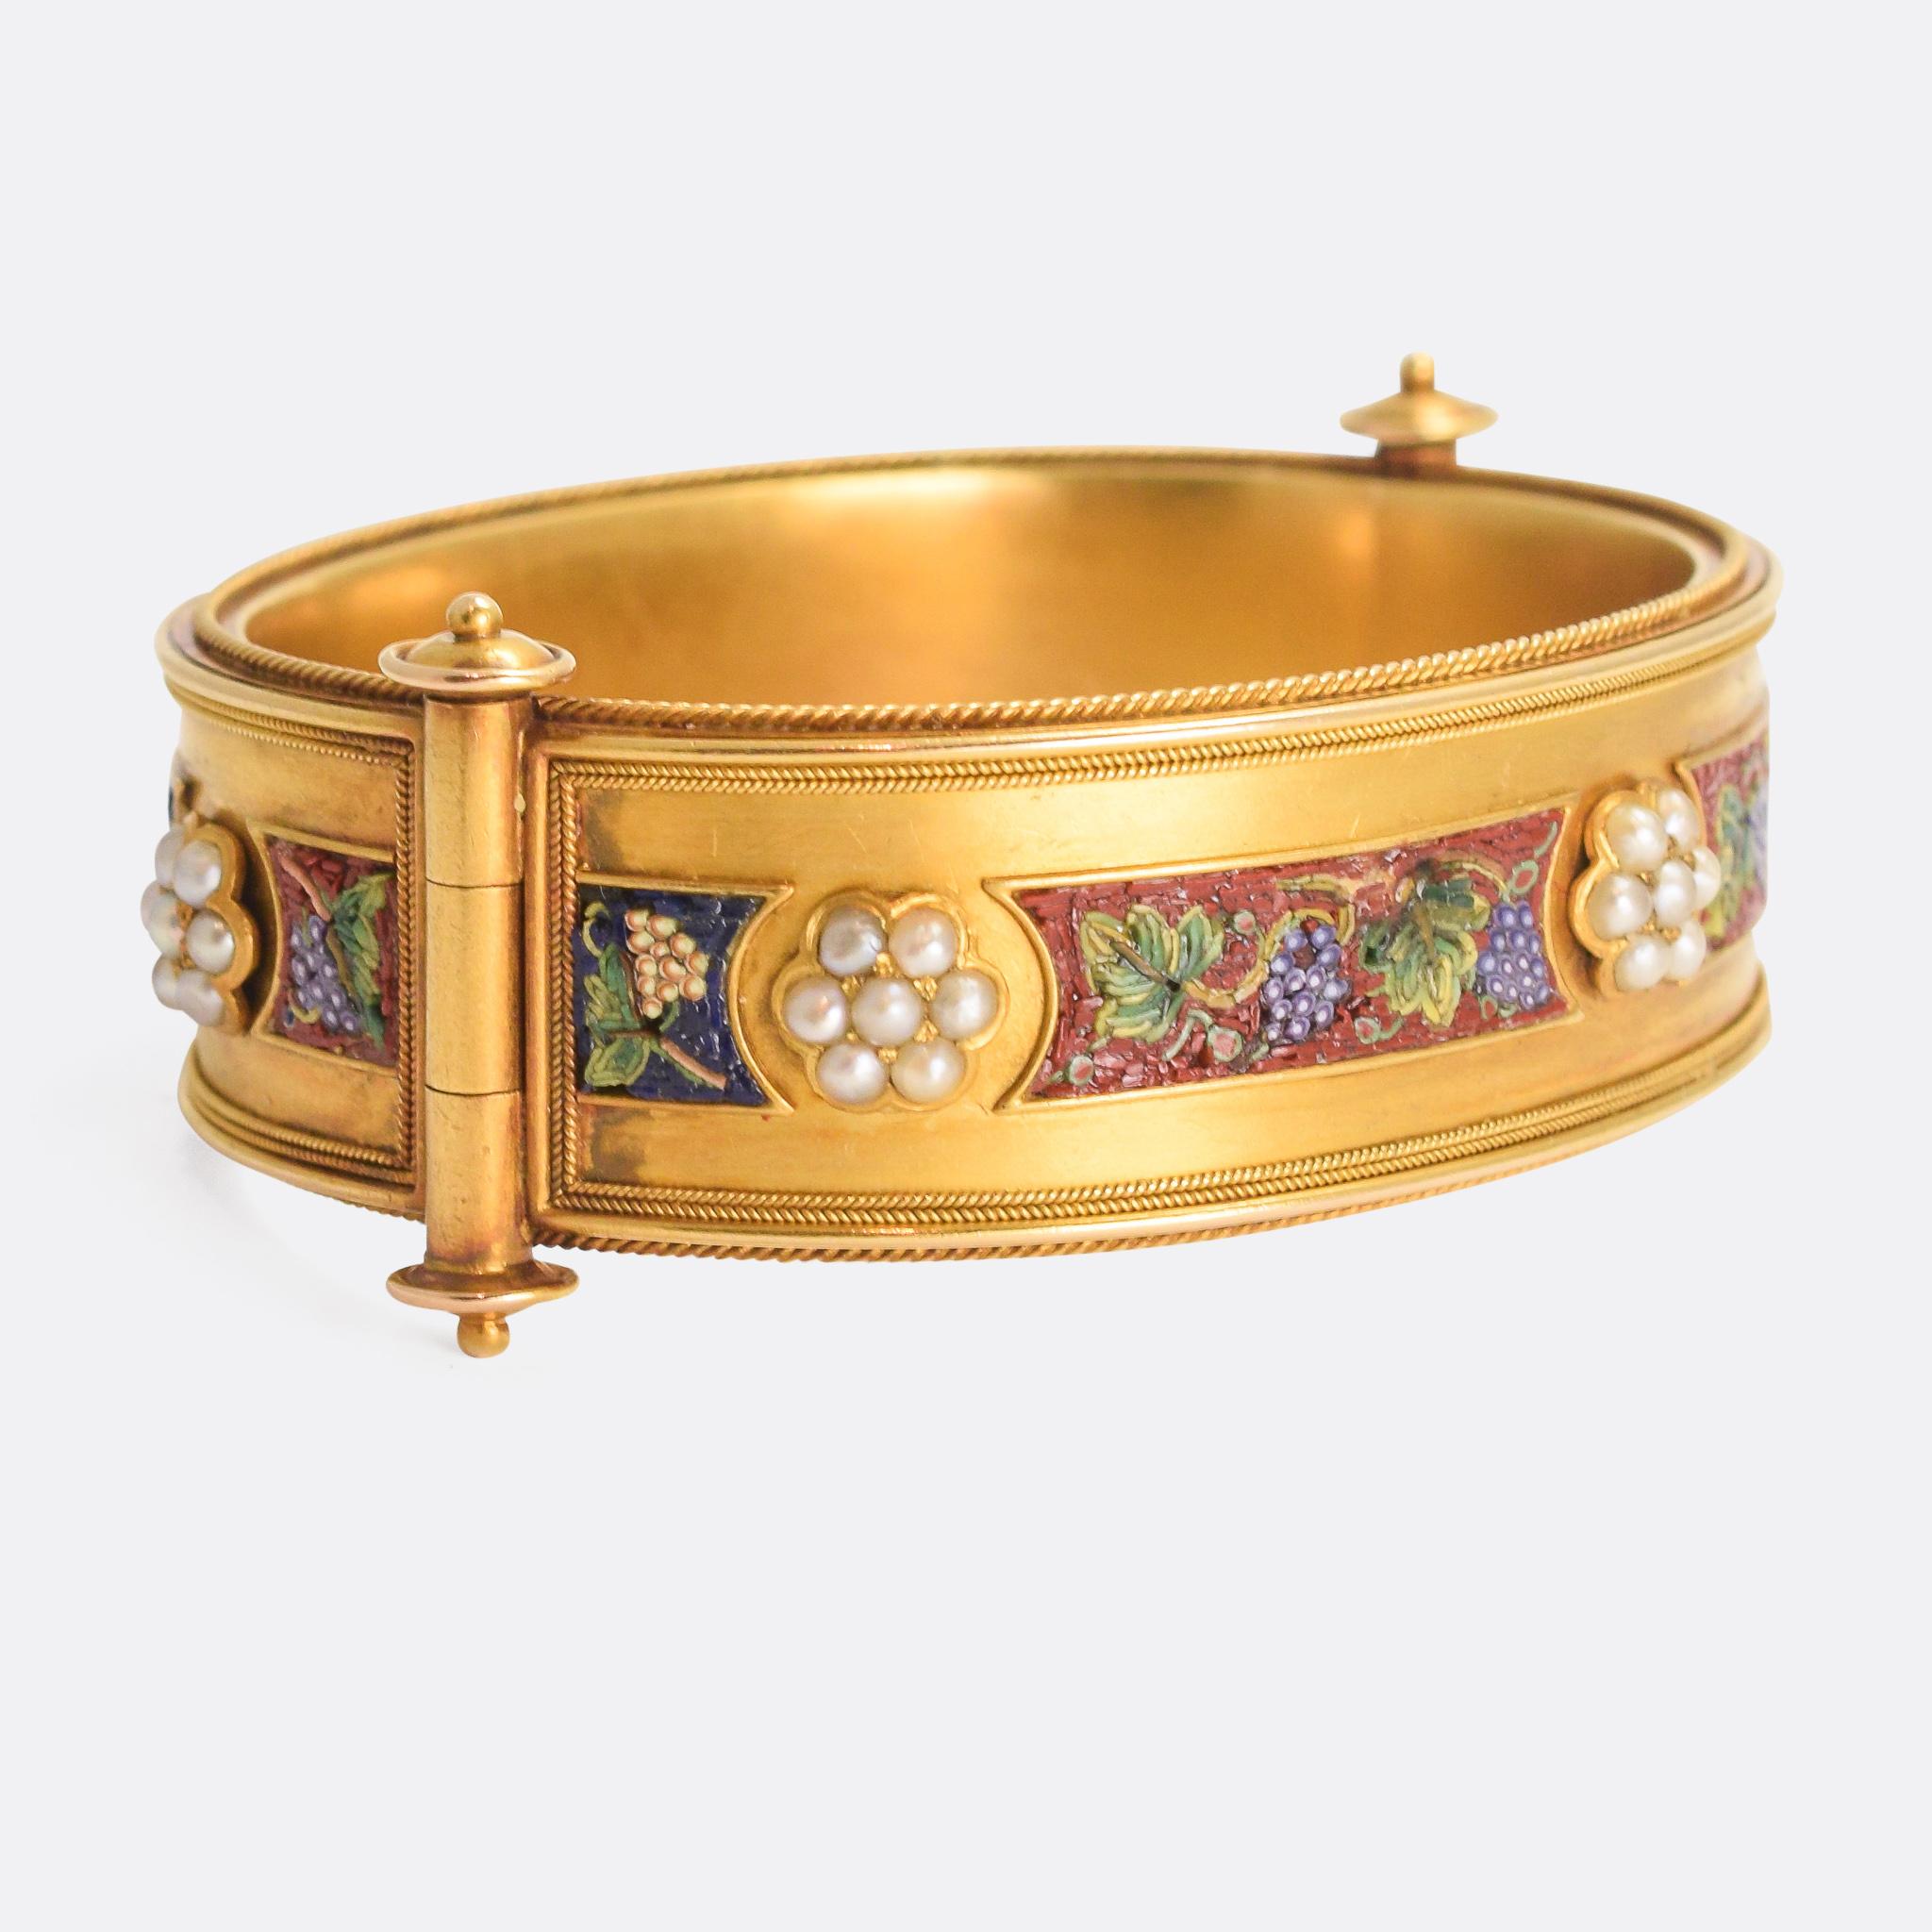 A spectacular mid-Victorian bangle set with eight micromosaic panels, as well as six natural pearl flower clusters. The micromosaics depict grape and vine motifs: red grapes on a blue background, and green grapes on a red background. It's modelled